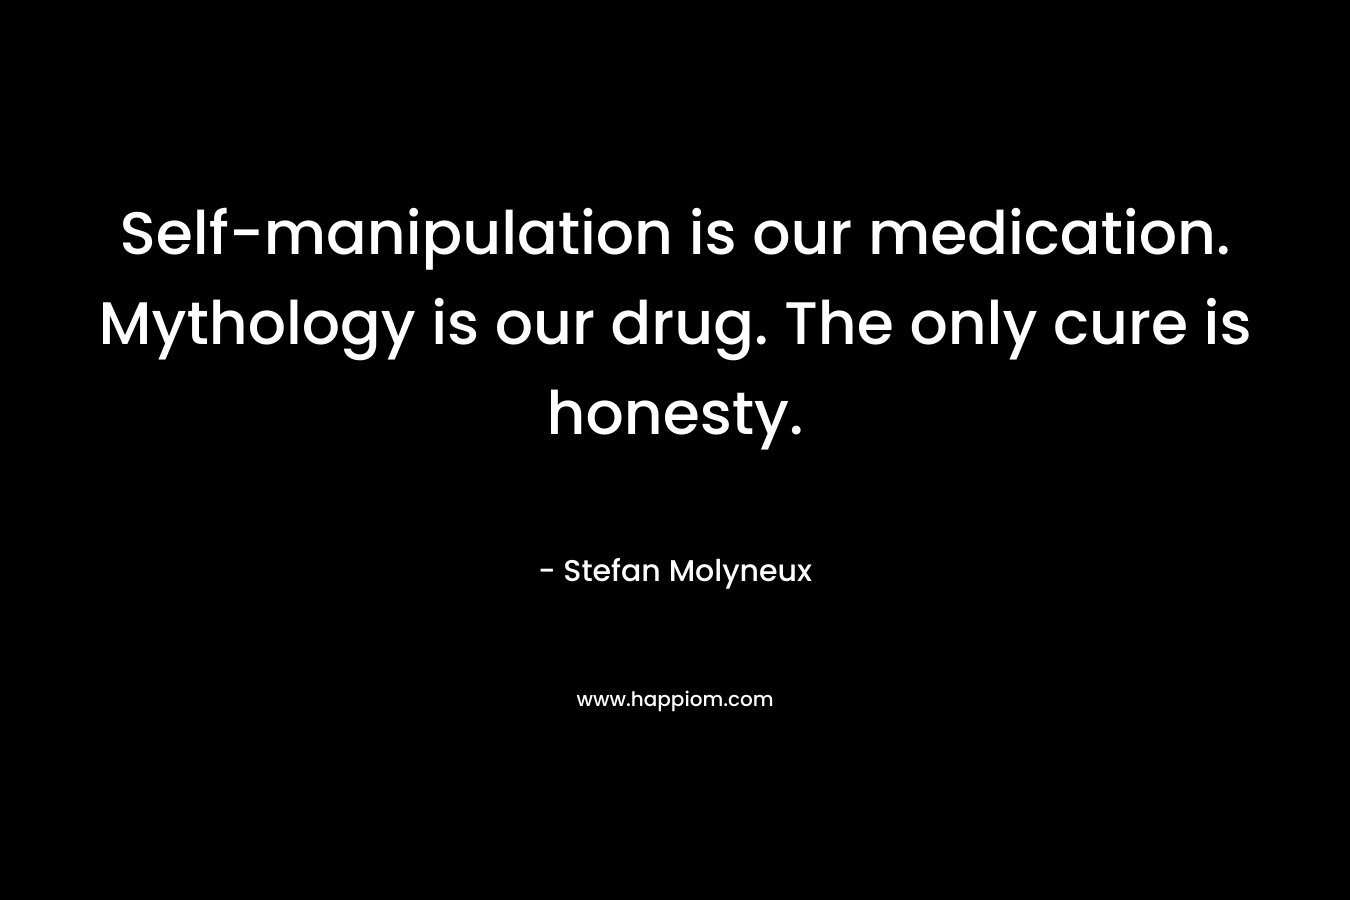 Self-manipulation is our medication. Mythology is our drug. The only cure is honesty.